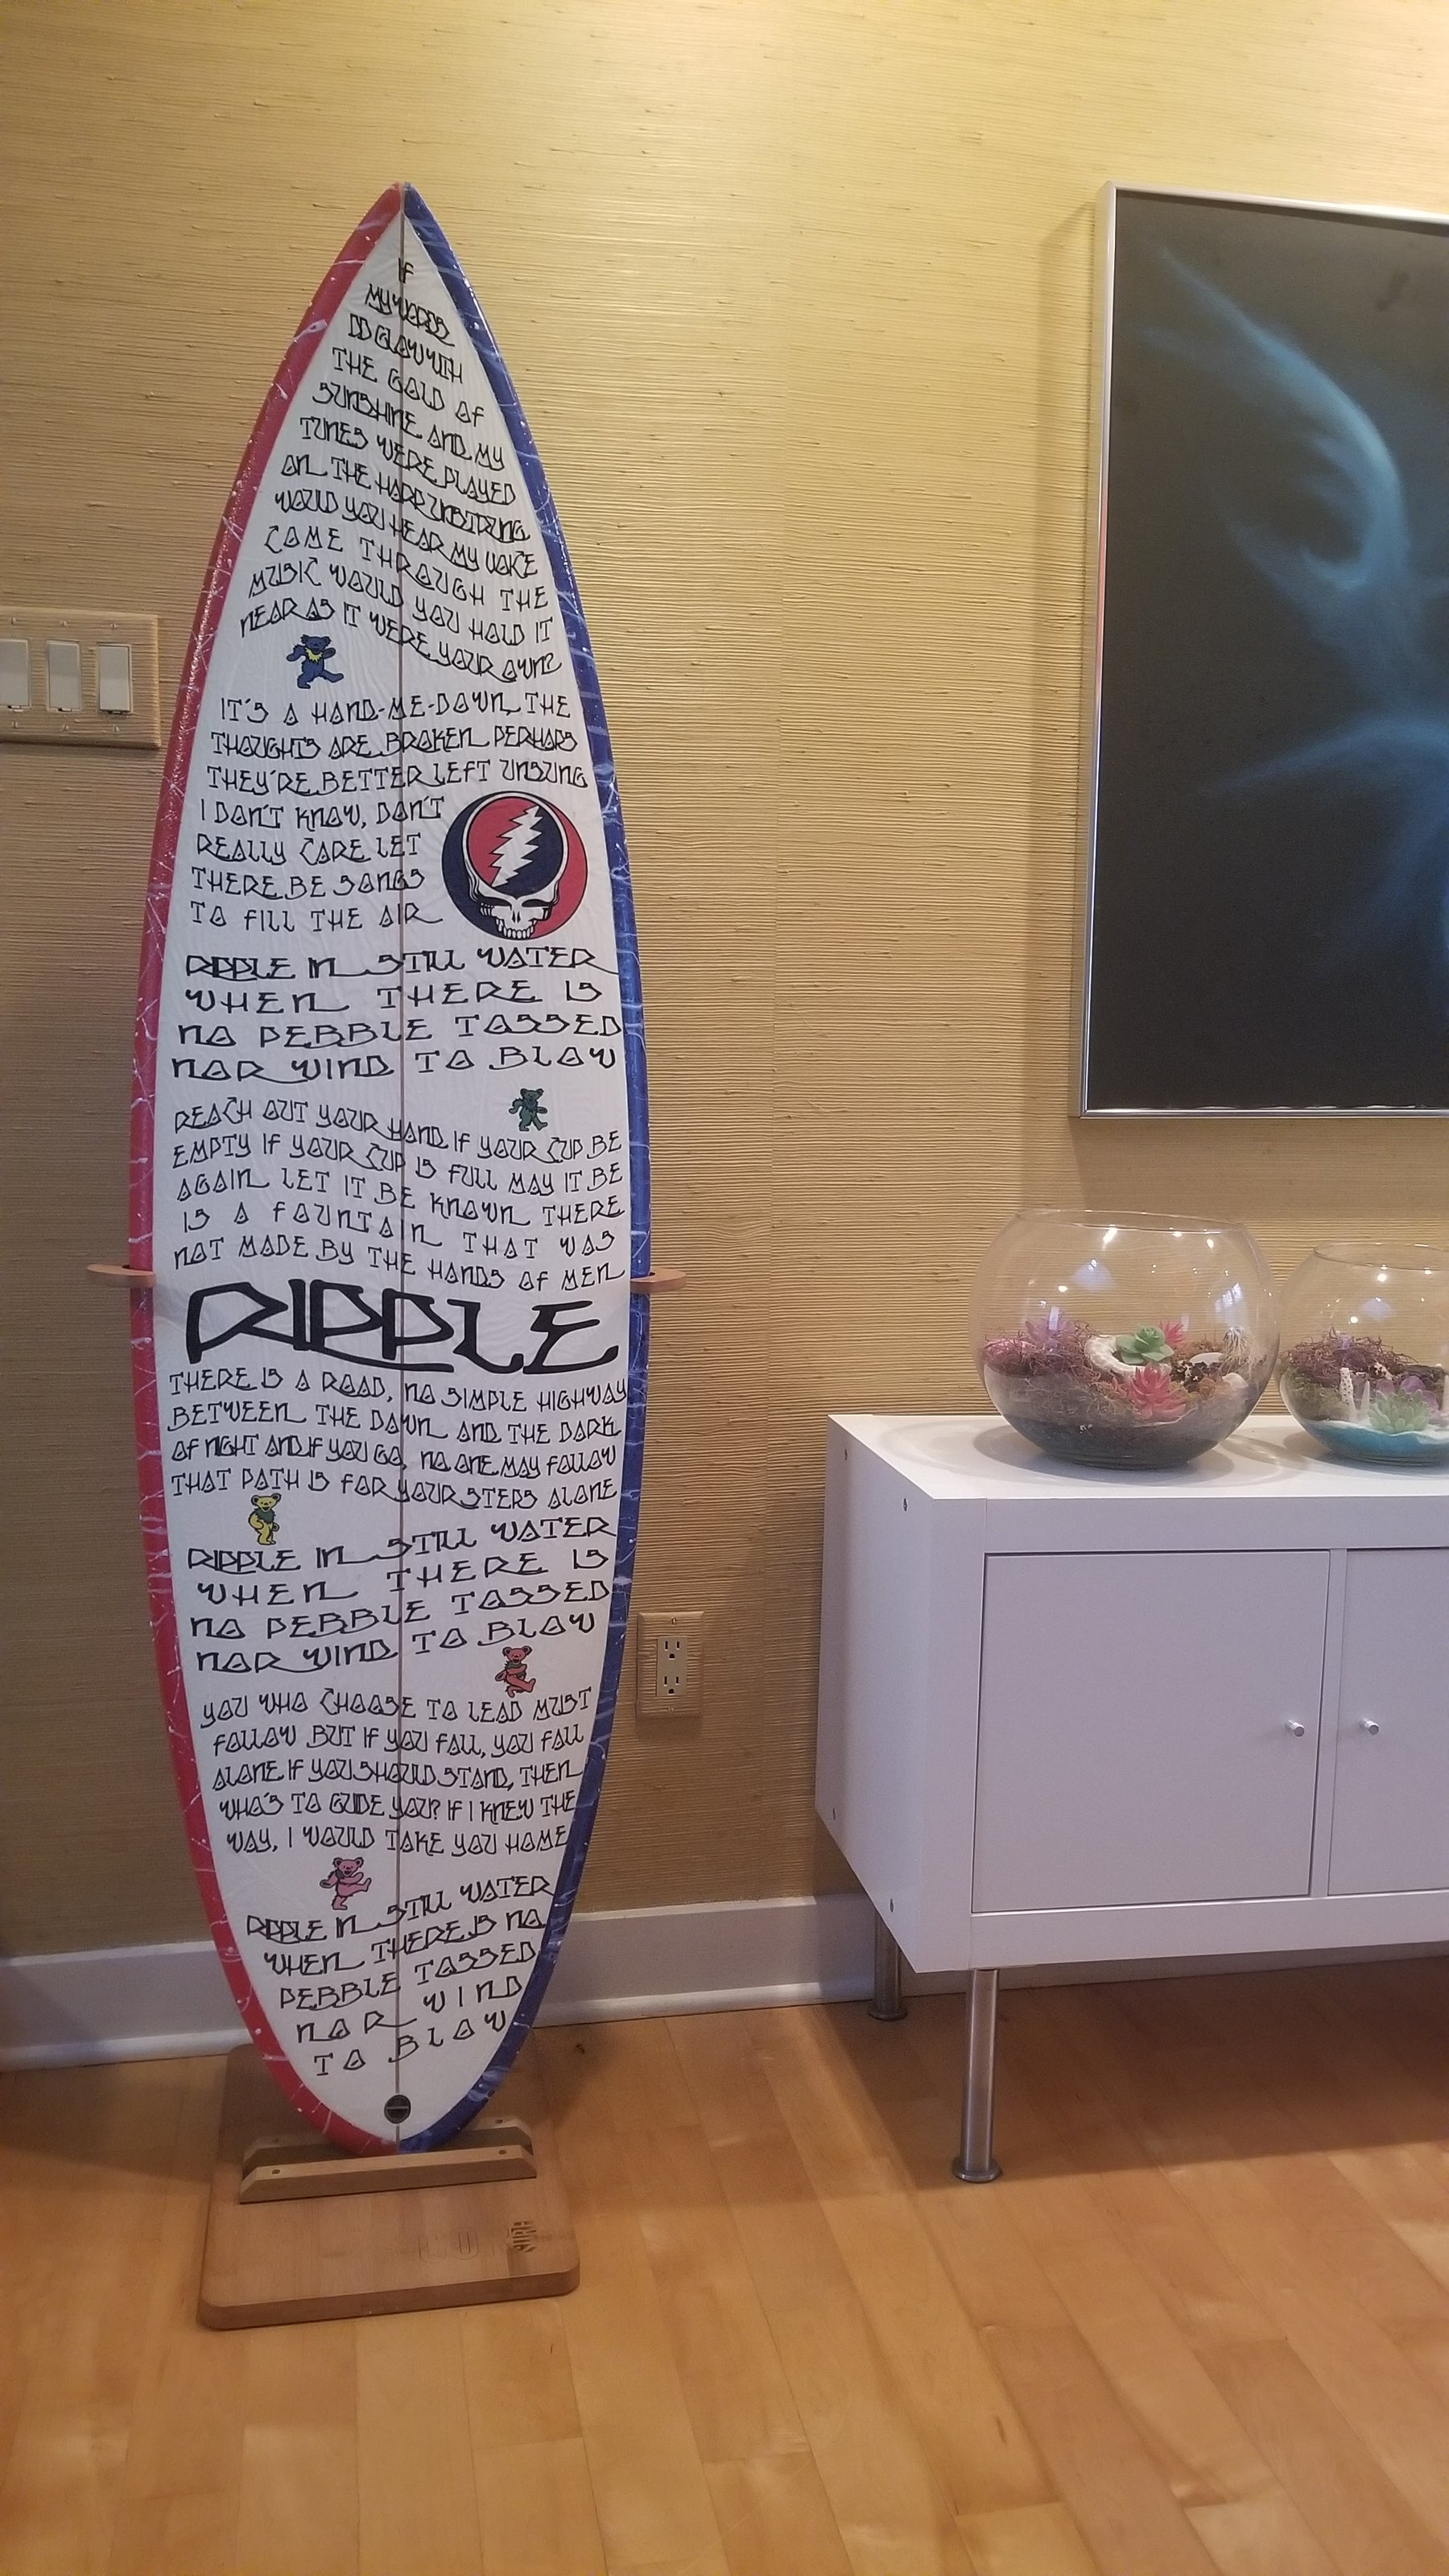 Crafting a Decorative Surfboard: A Step-by-Step Guide